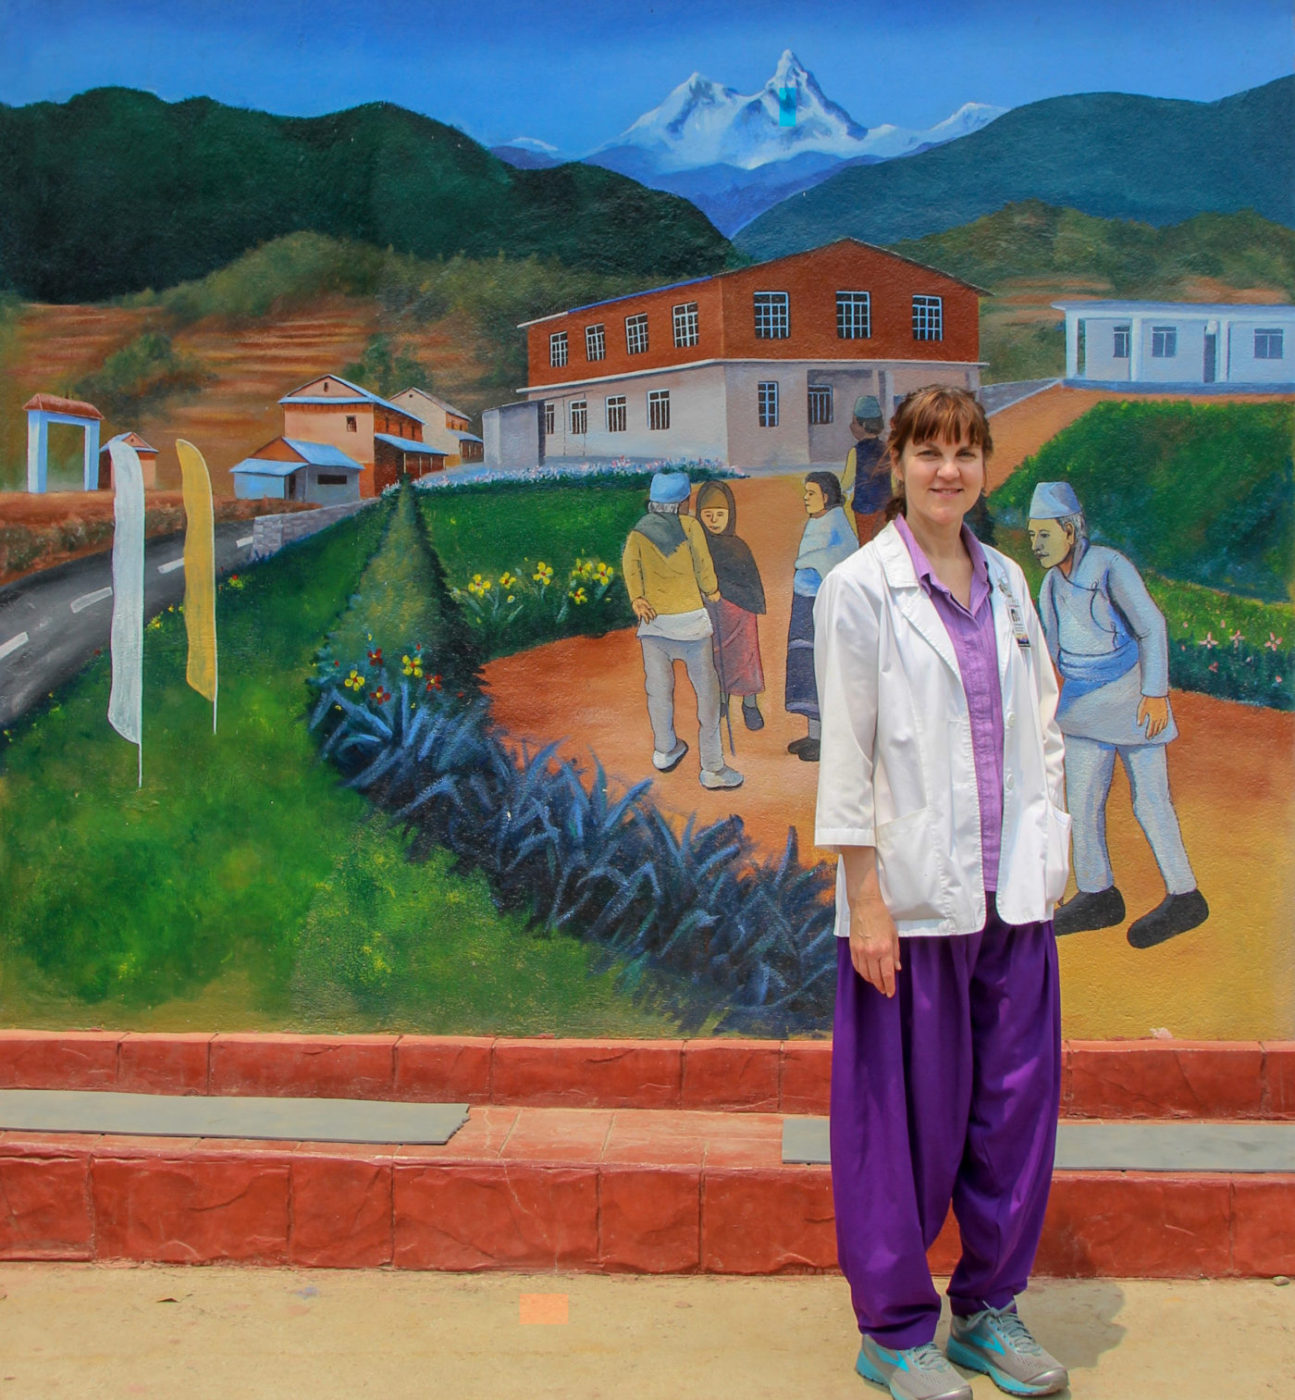 American Acupuncturist Meets Nepali Patients, Part 2:  Being Primary Care Practitioners